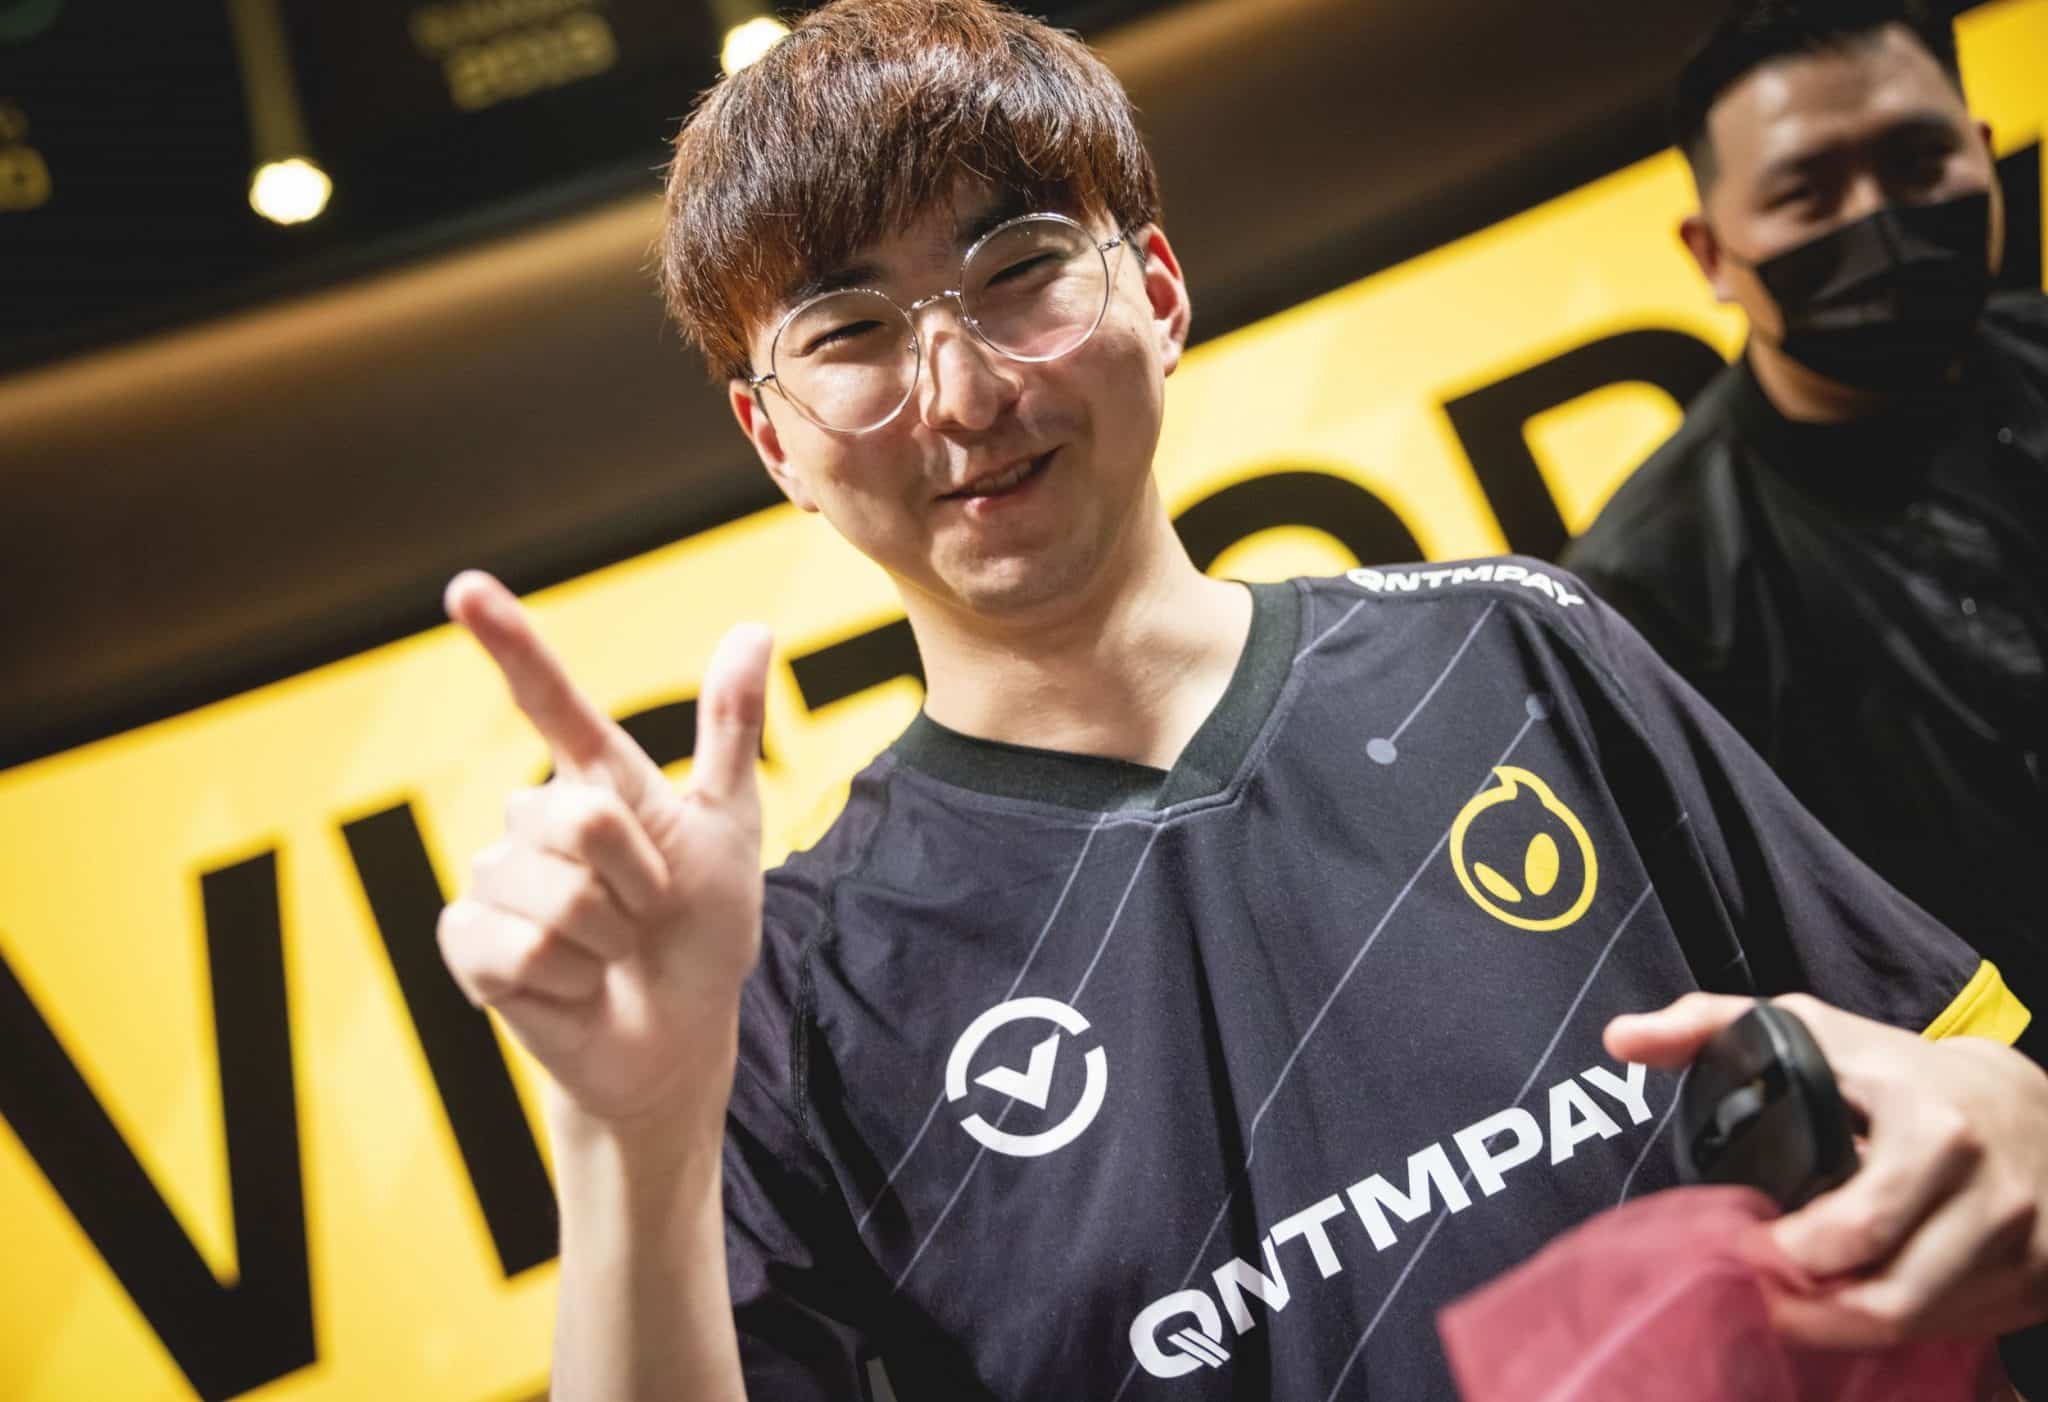 River flashing peace sign on LCS stage wearing Dignitas jersey